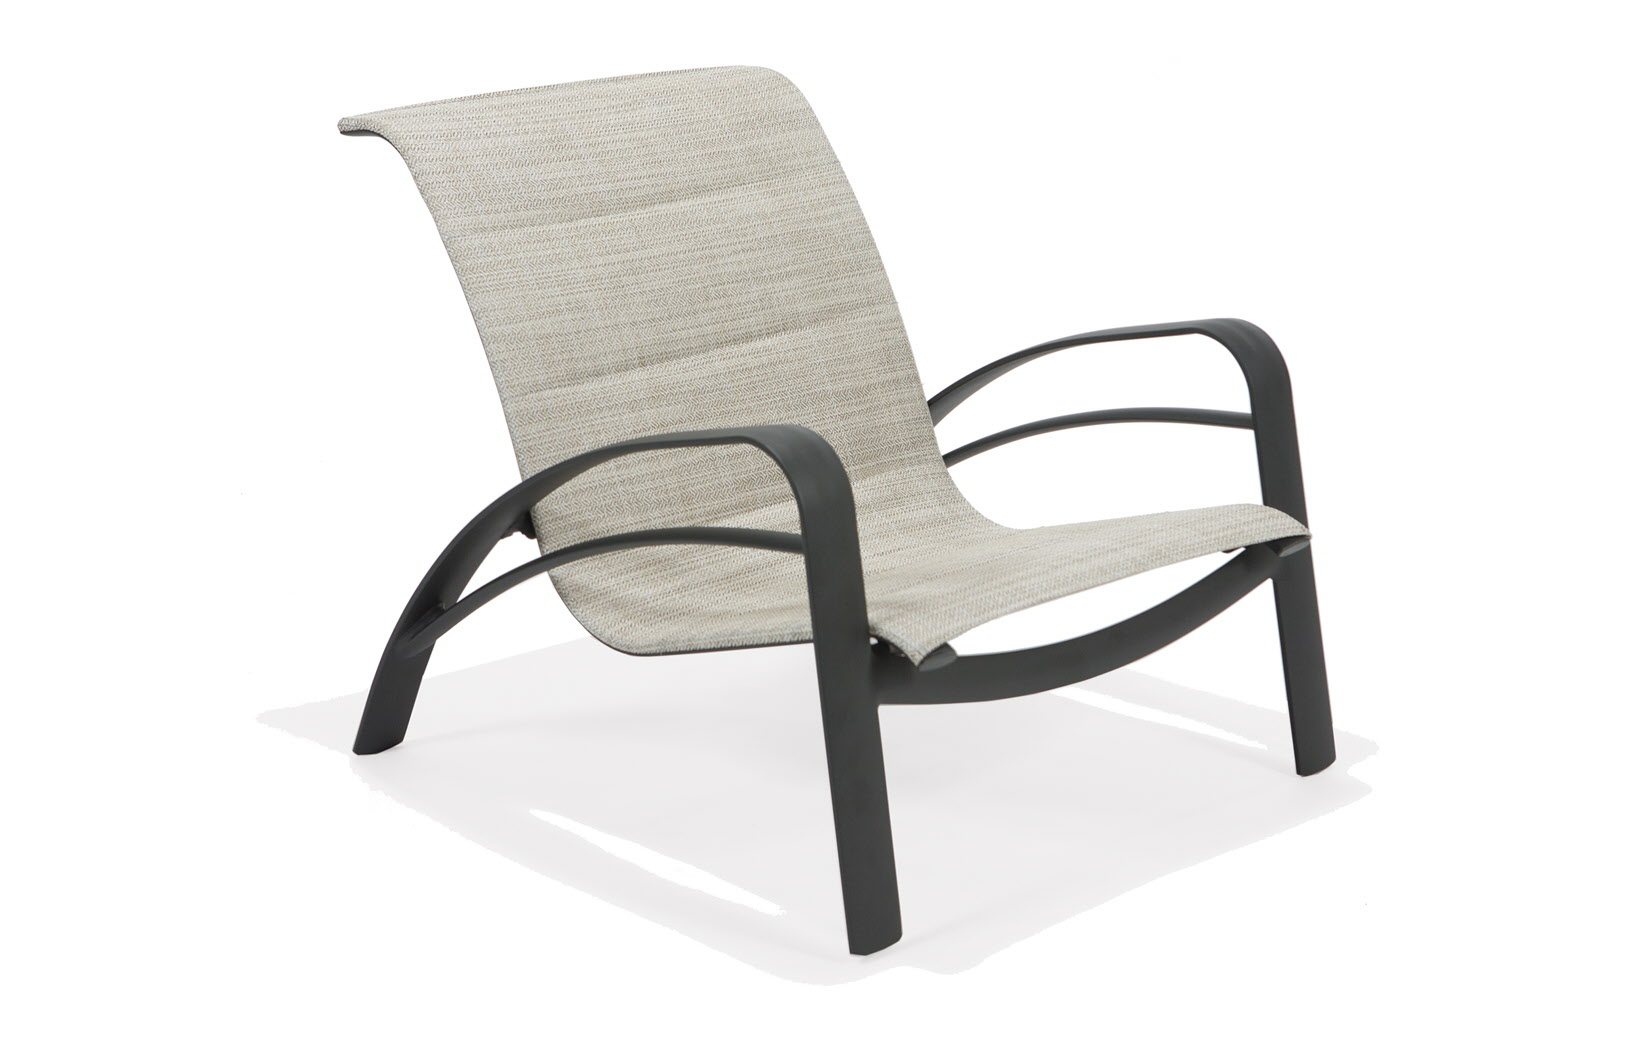 Edge Padded Sling Collection Nesting Spa Chair